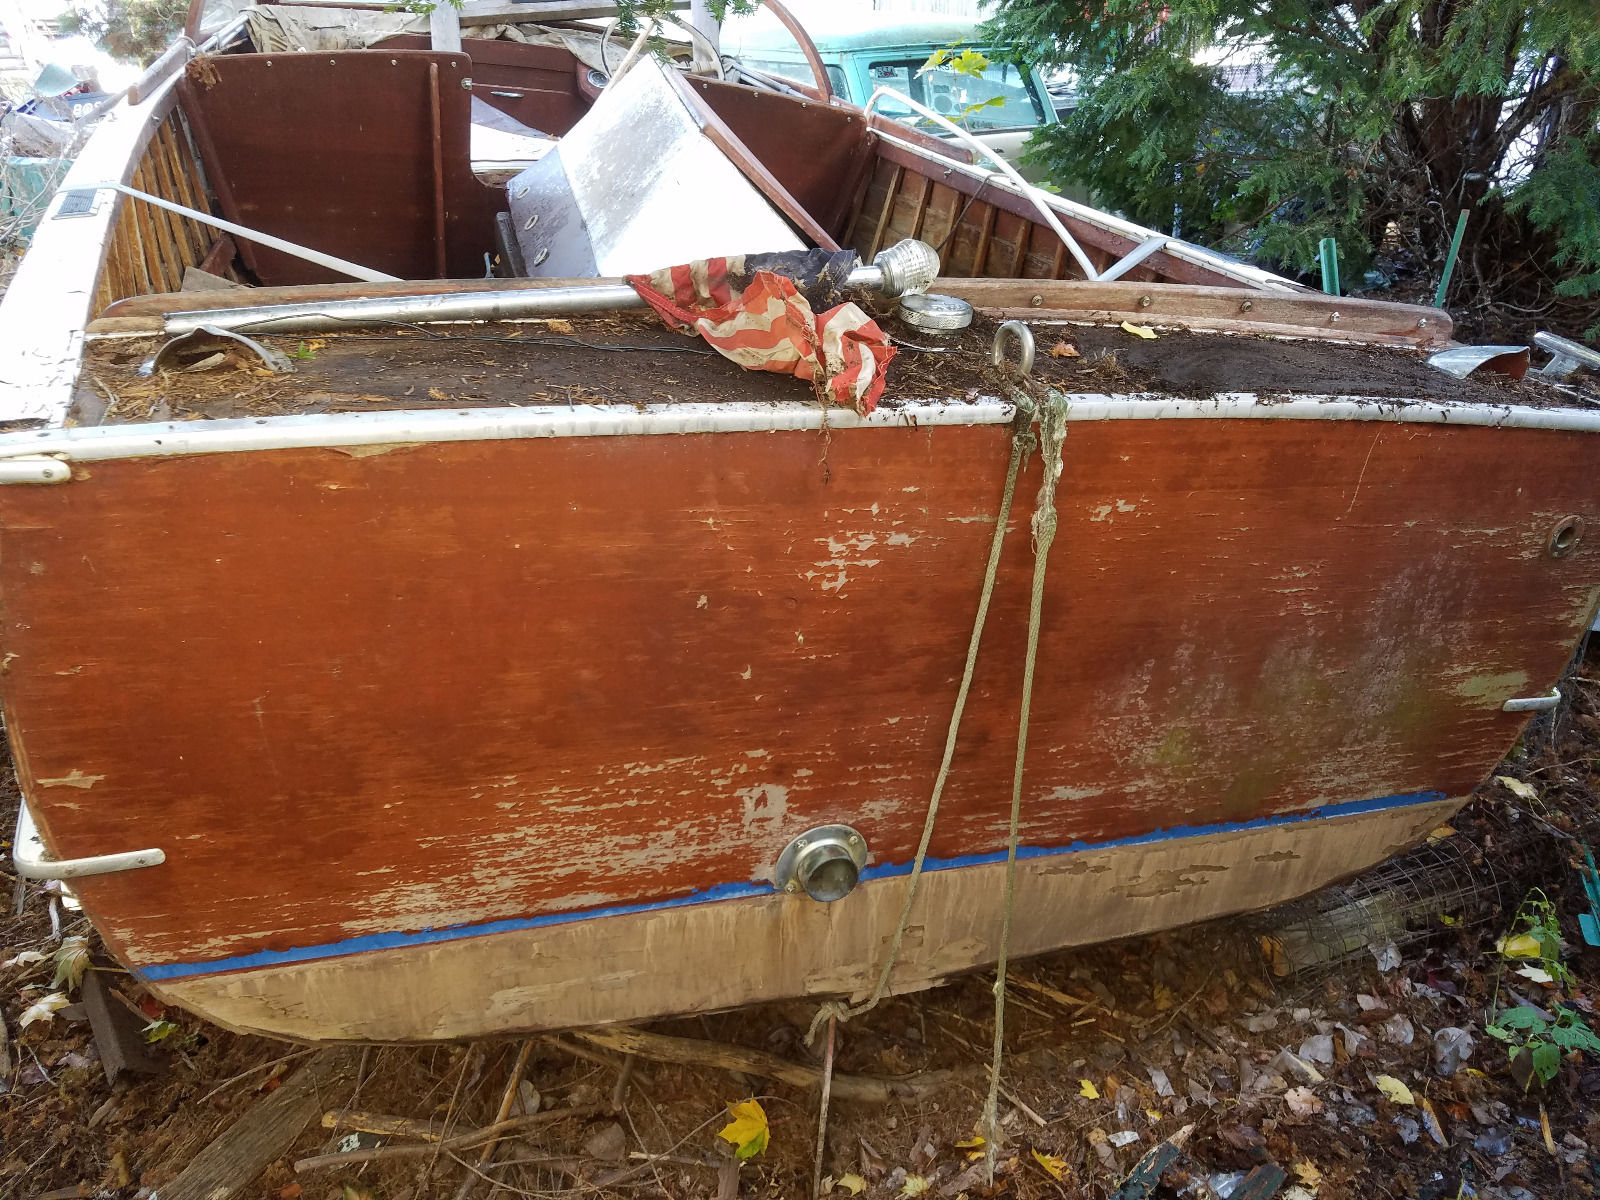 Chris Craft Sea Skiff 1959 for sale for $2,000 - Boats ...